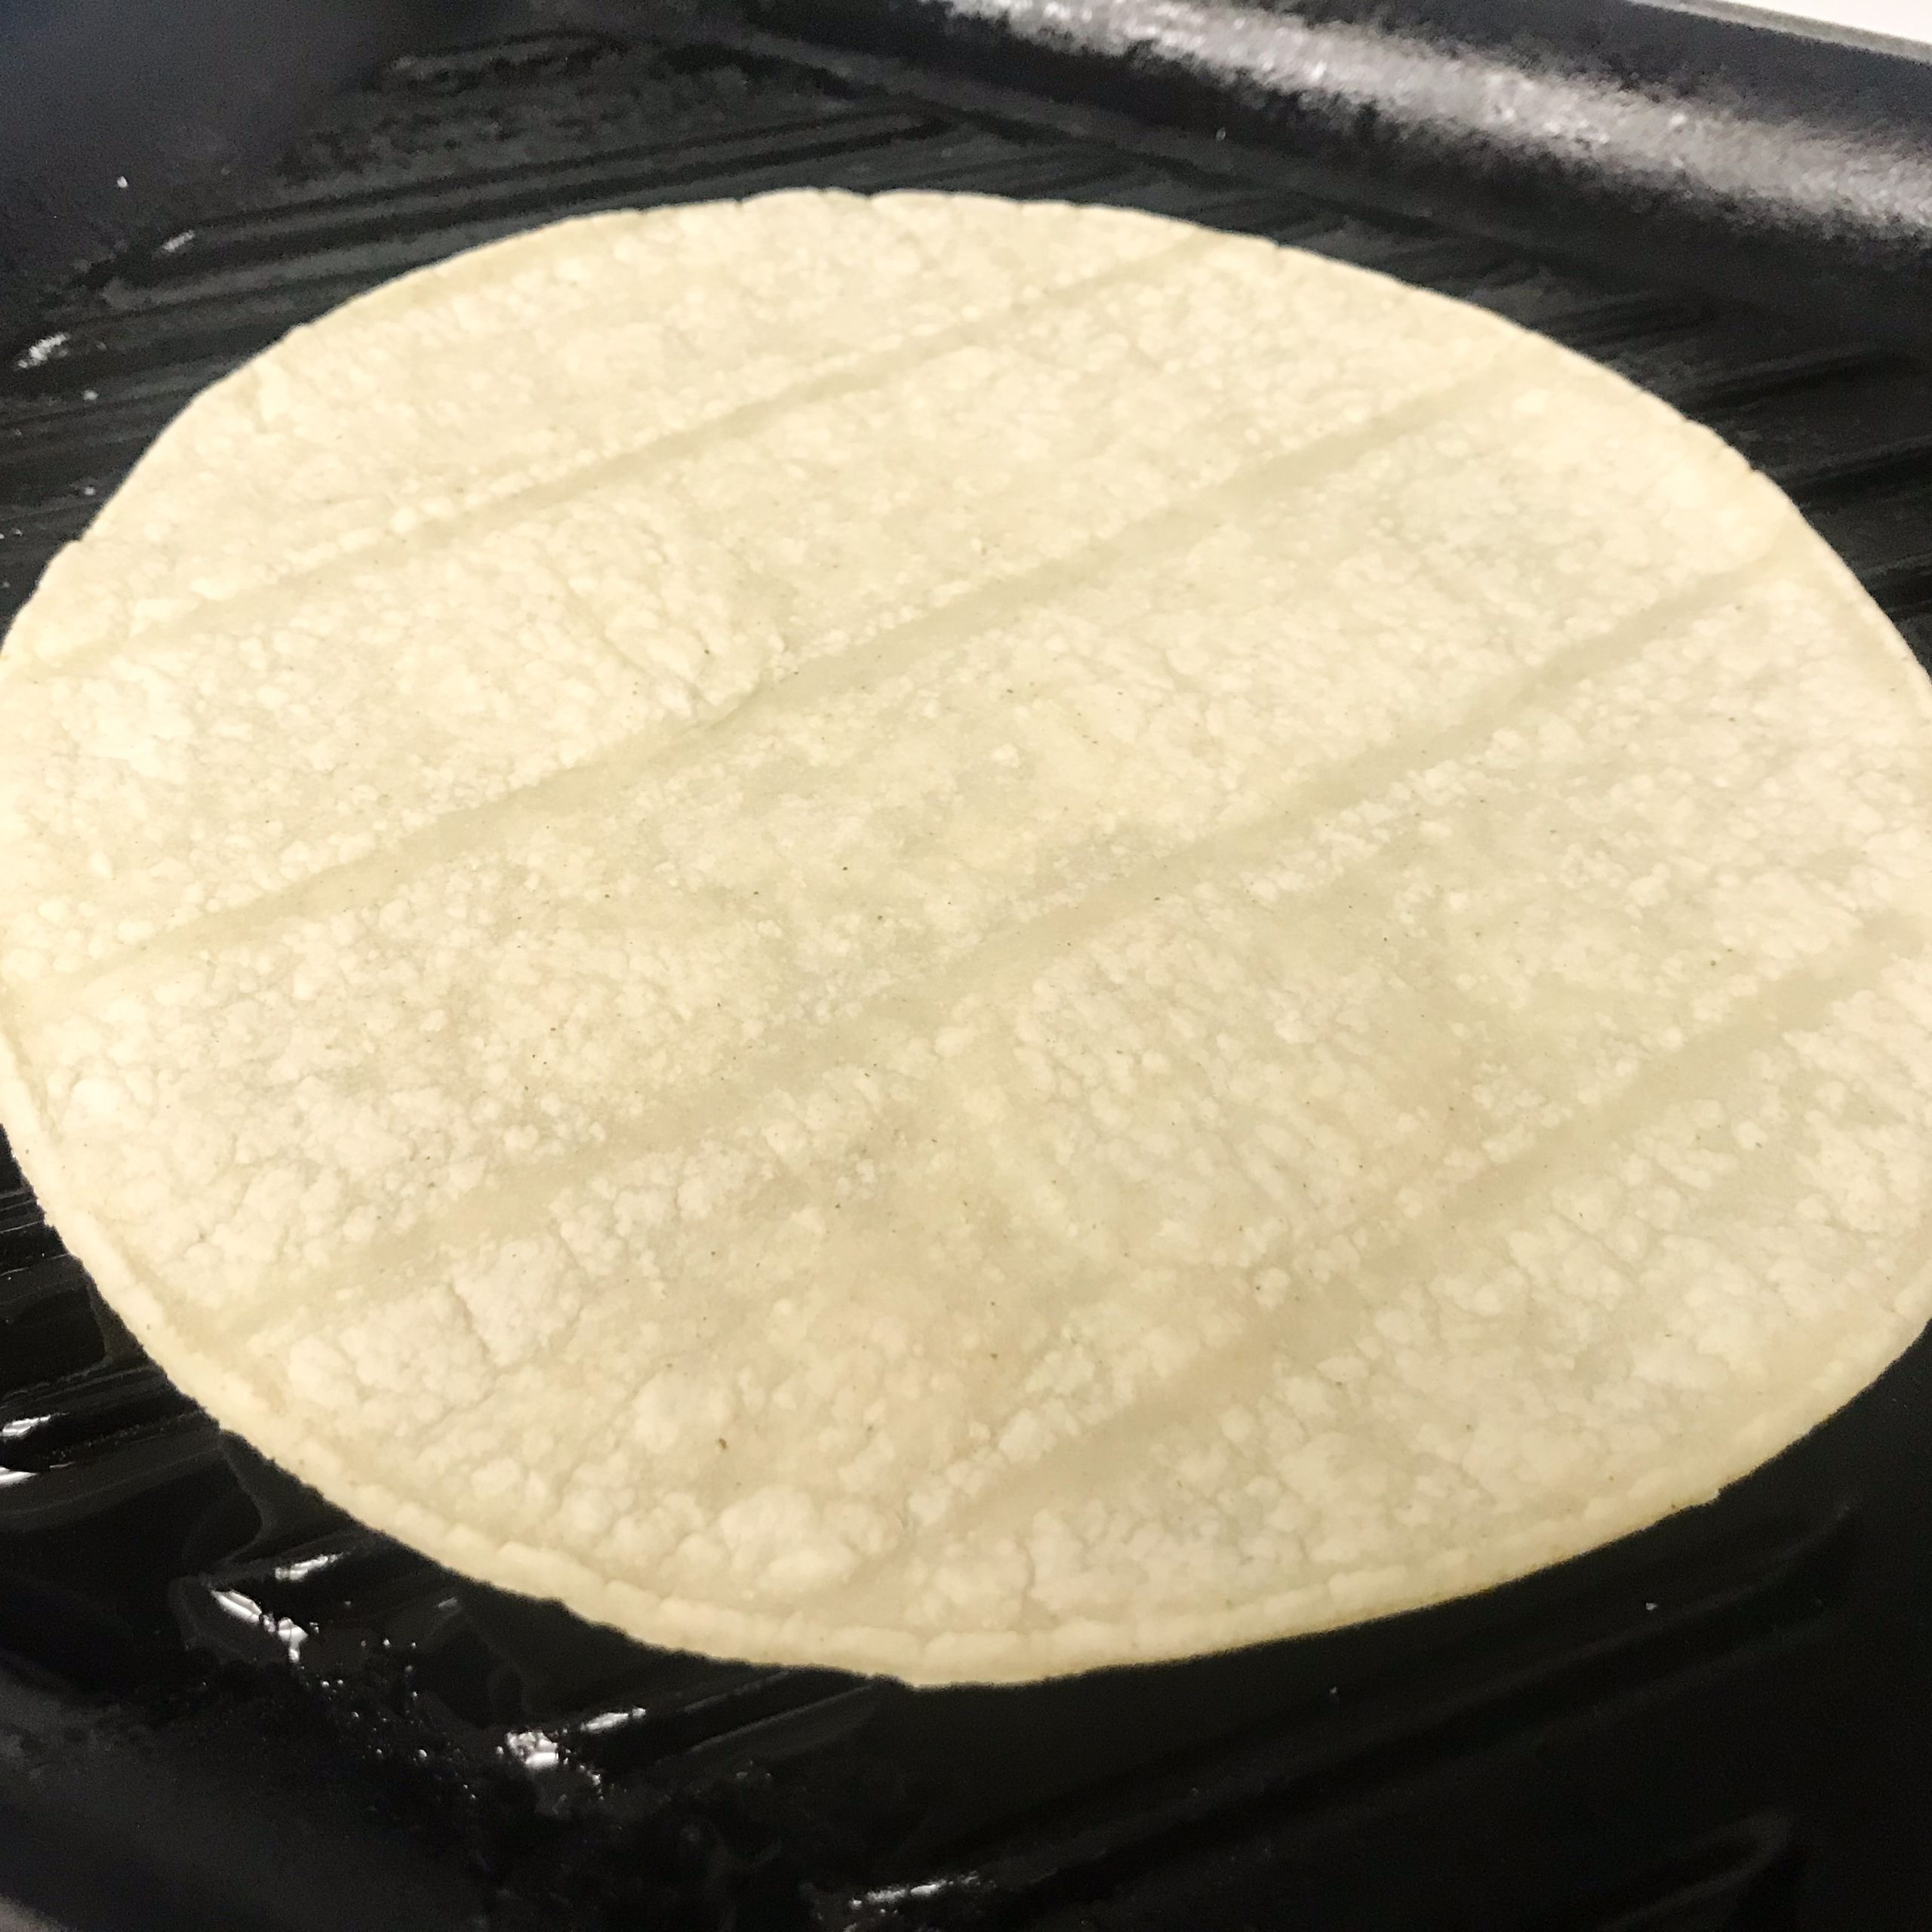 tortilla grilling on a grill pan